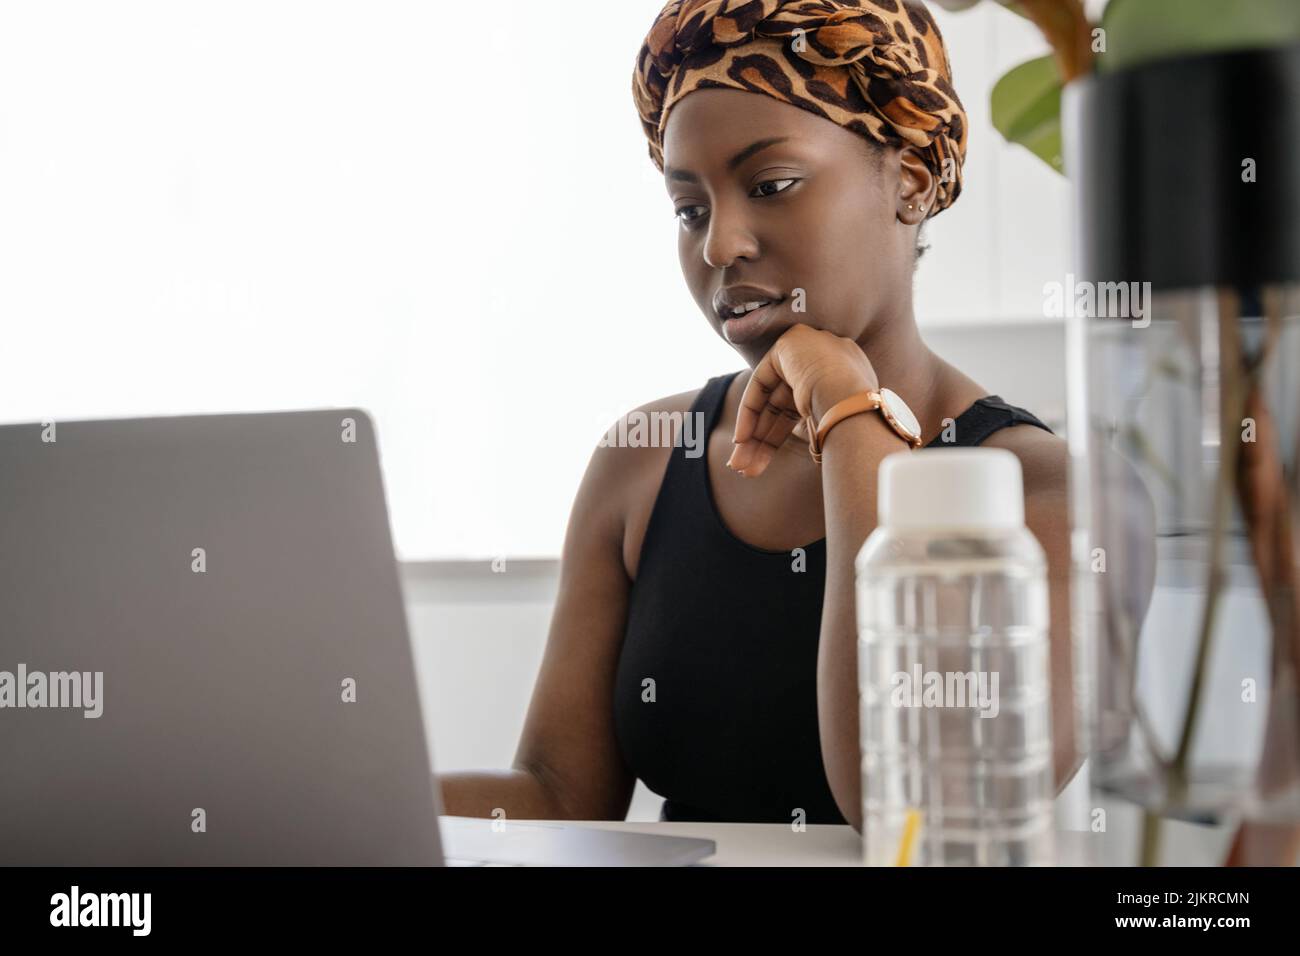 Beautiful young African woman wearing tradition headscarf. Sitting at home working on laptop. Stock Photo